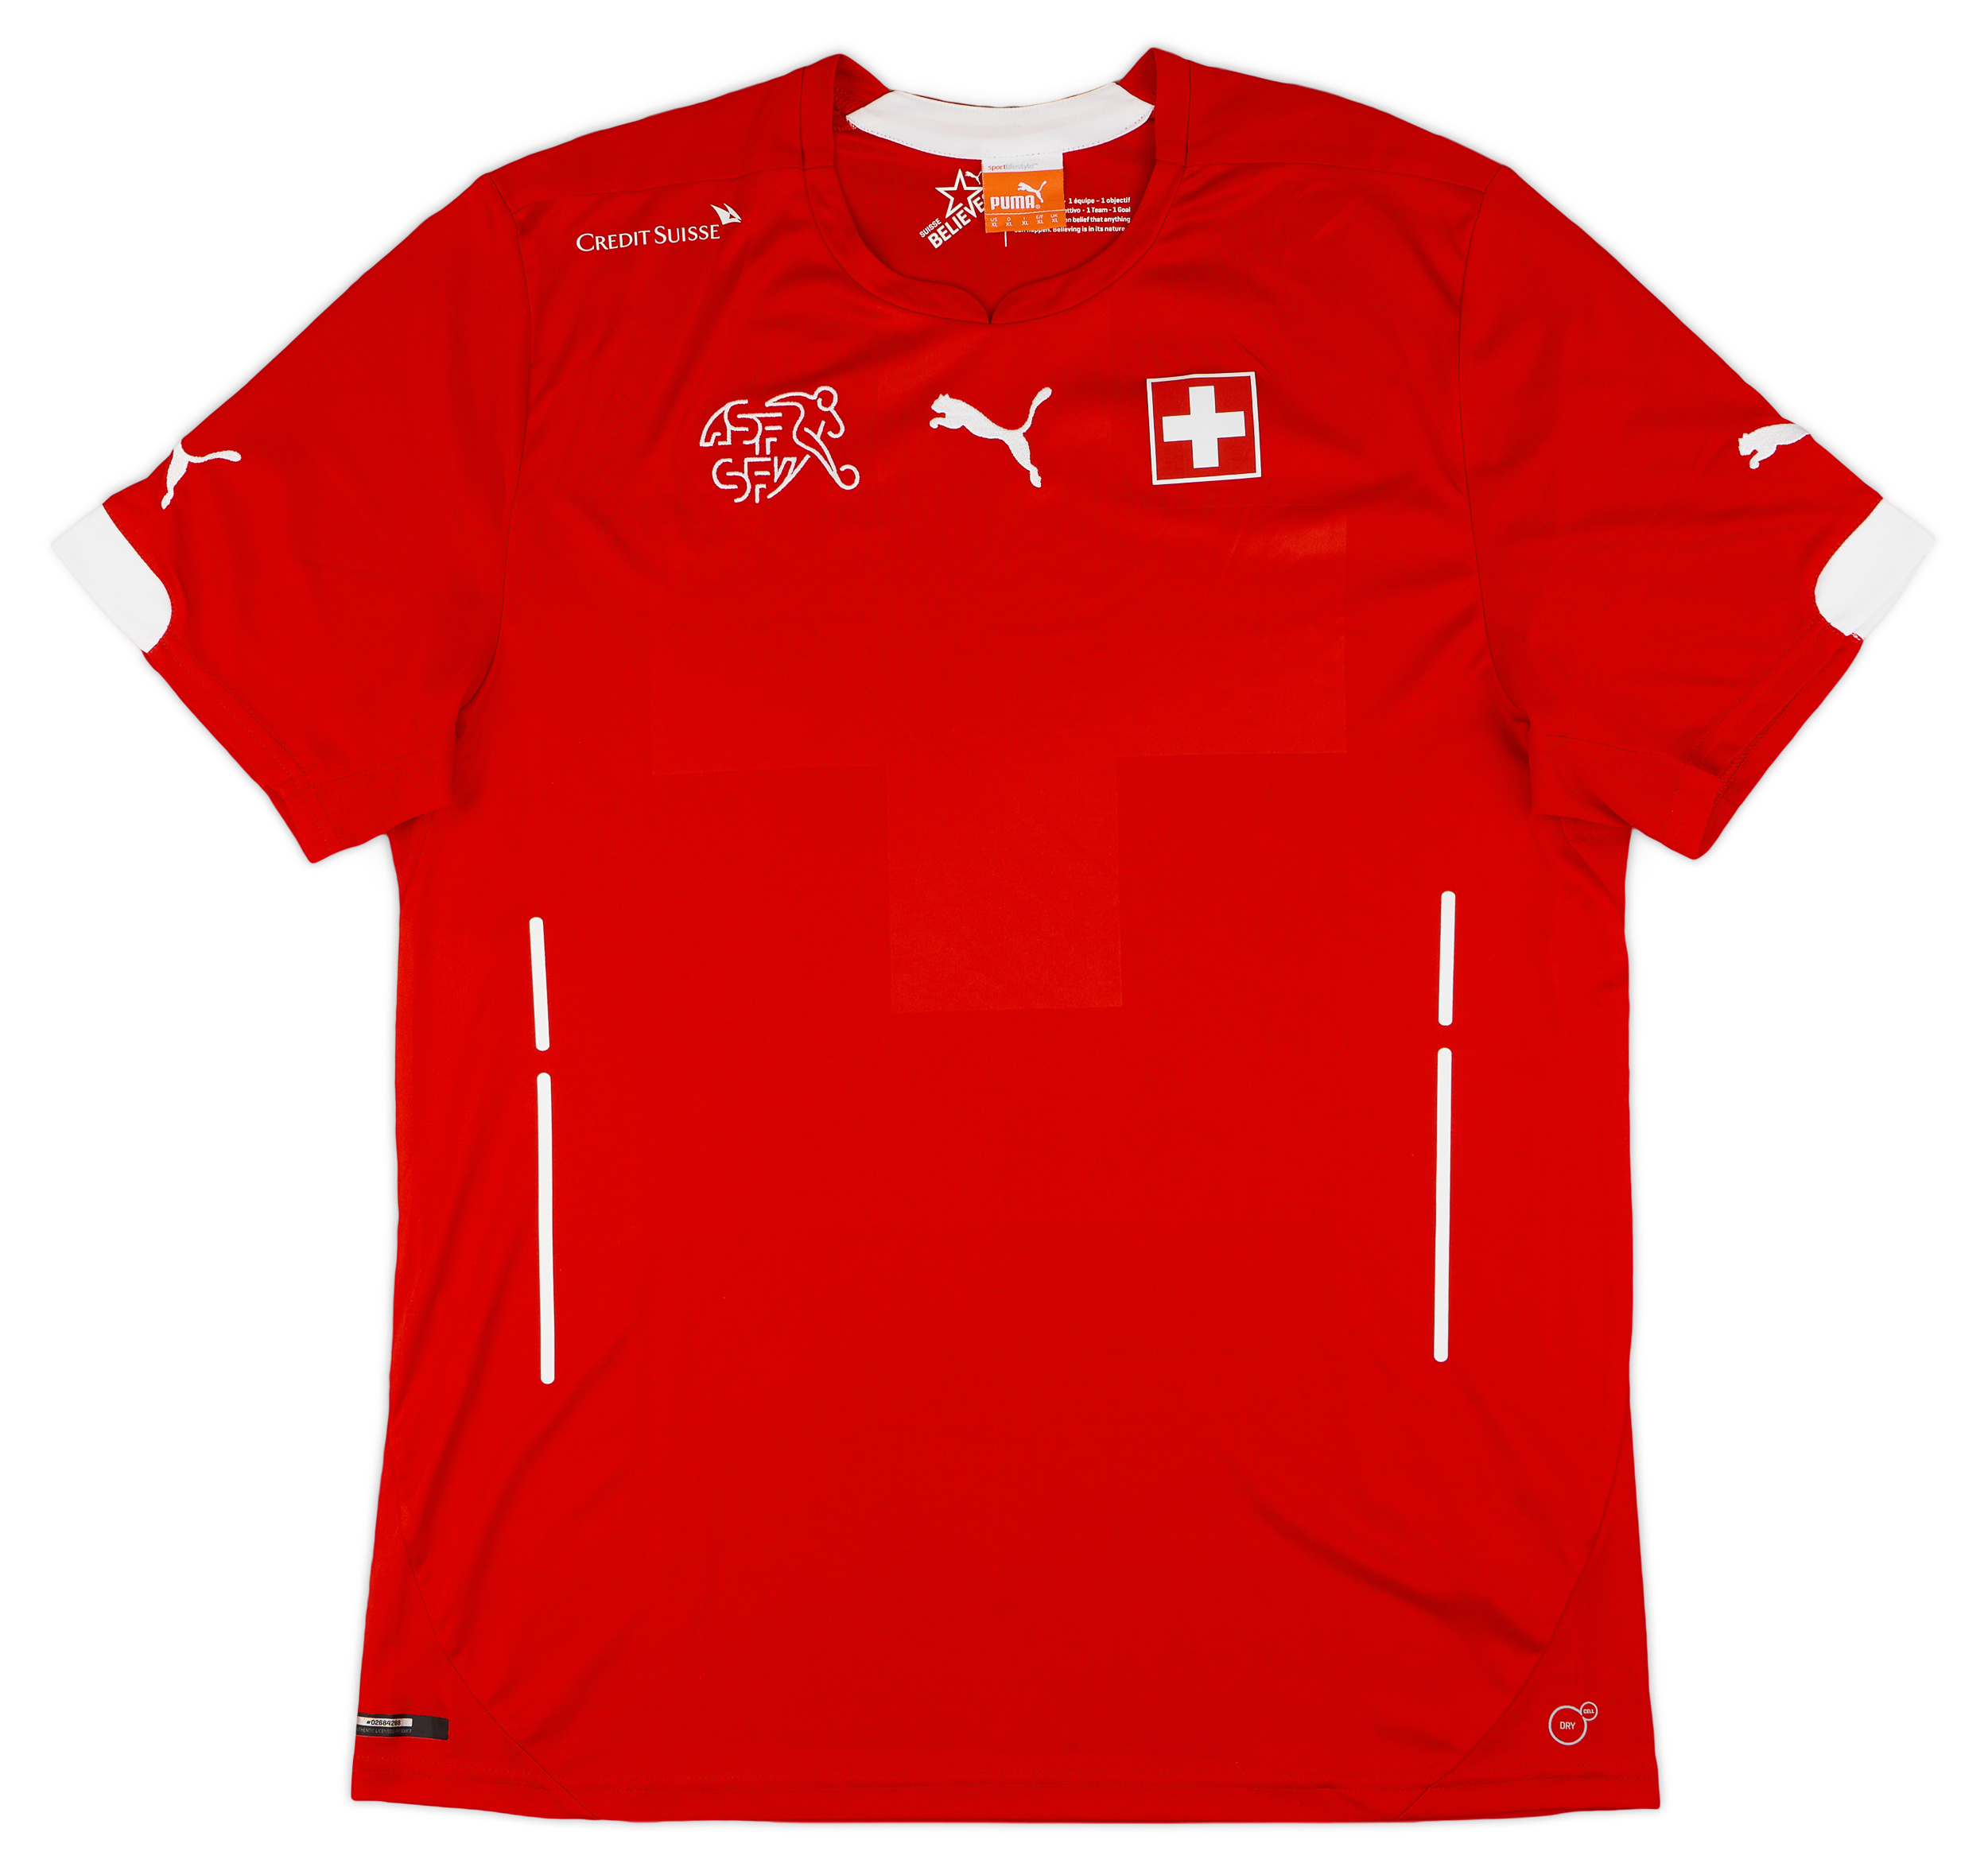 2014-15 Switzerland Player Issue Home Shirt (PRO Fit) - 9/10 - ()